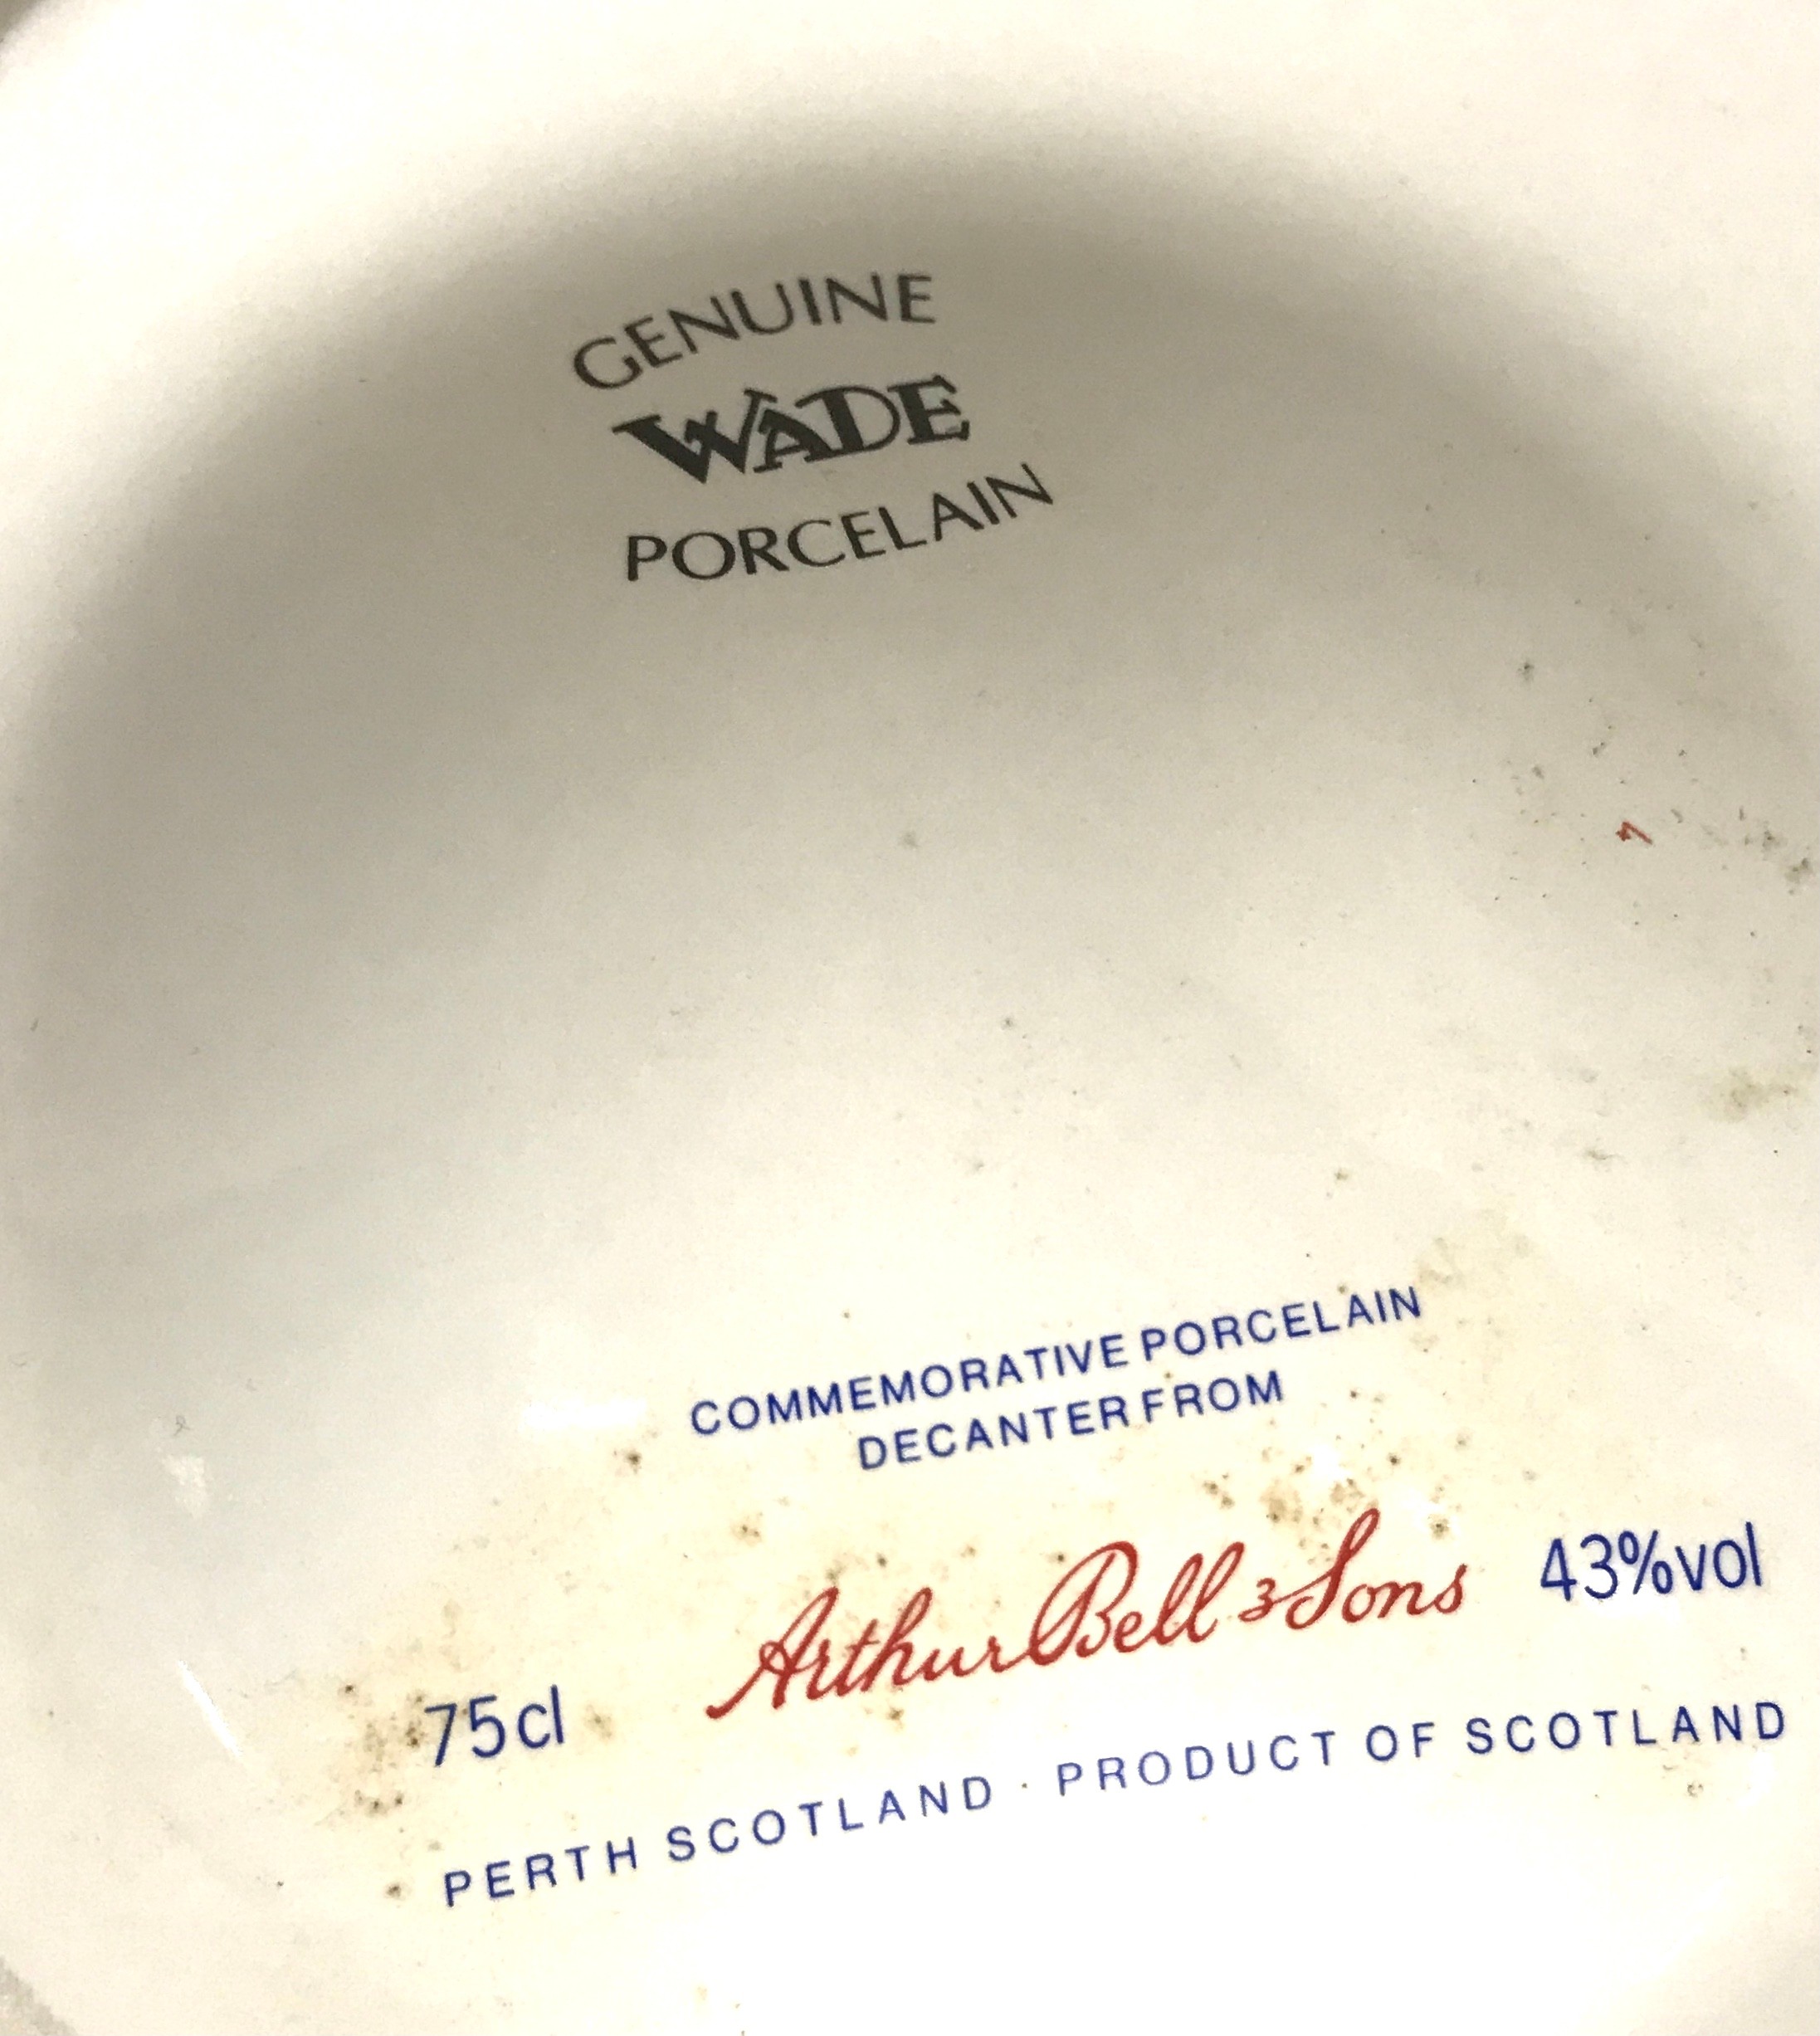 Two Royal Decanter Bells Old Scotch Whisky - Image 3 of 4